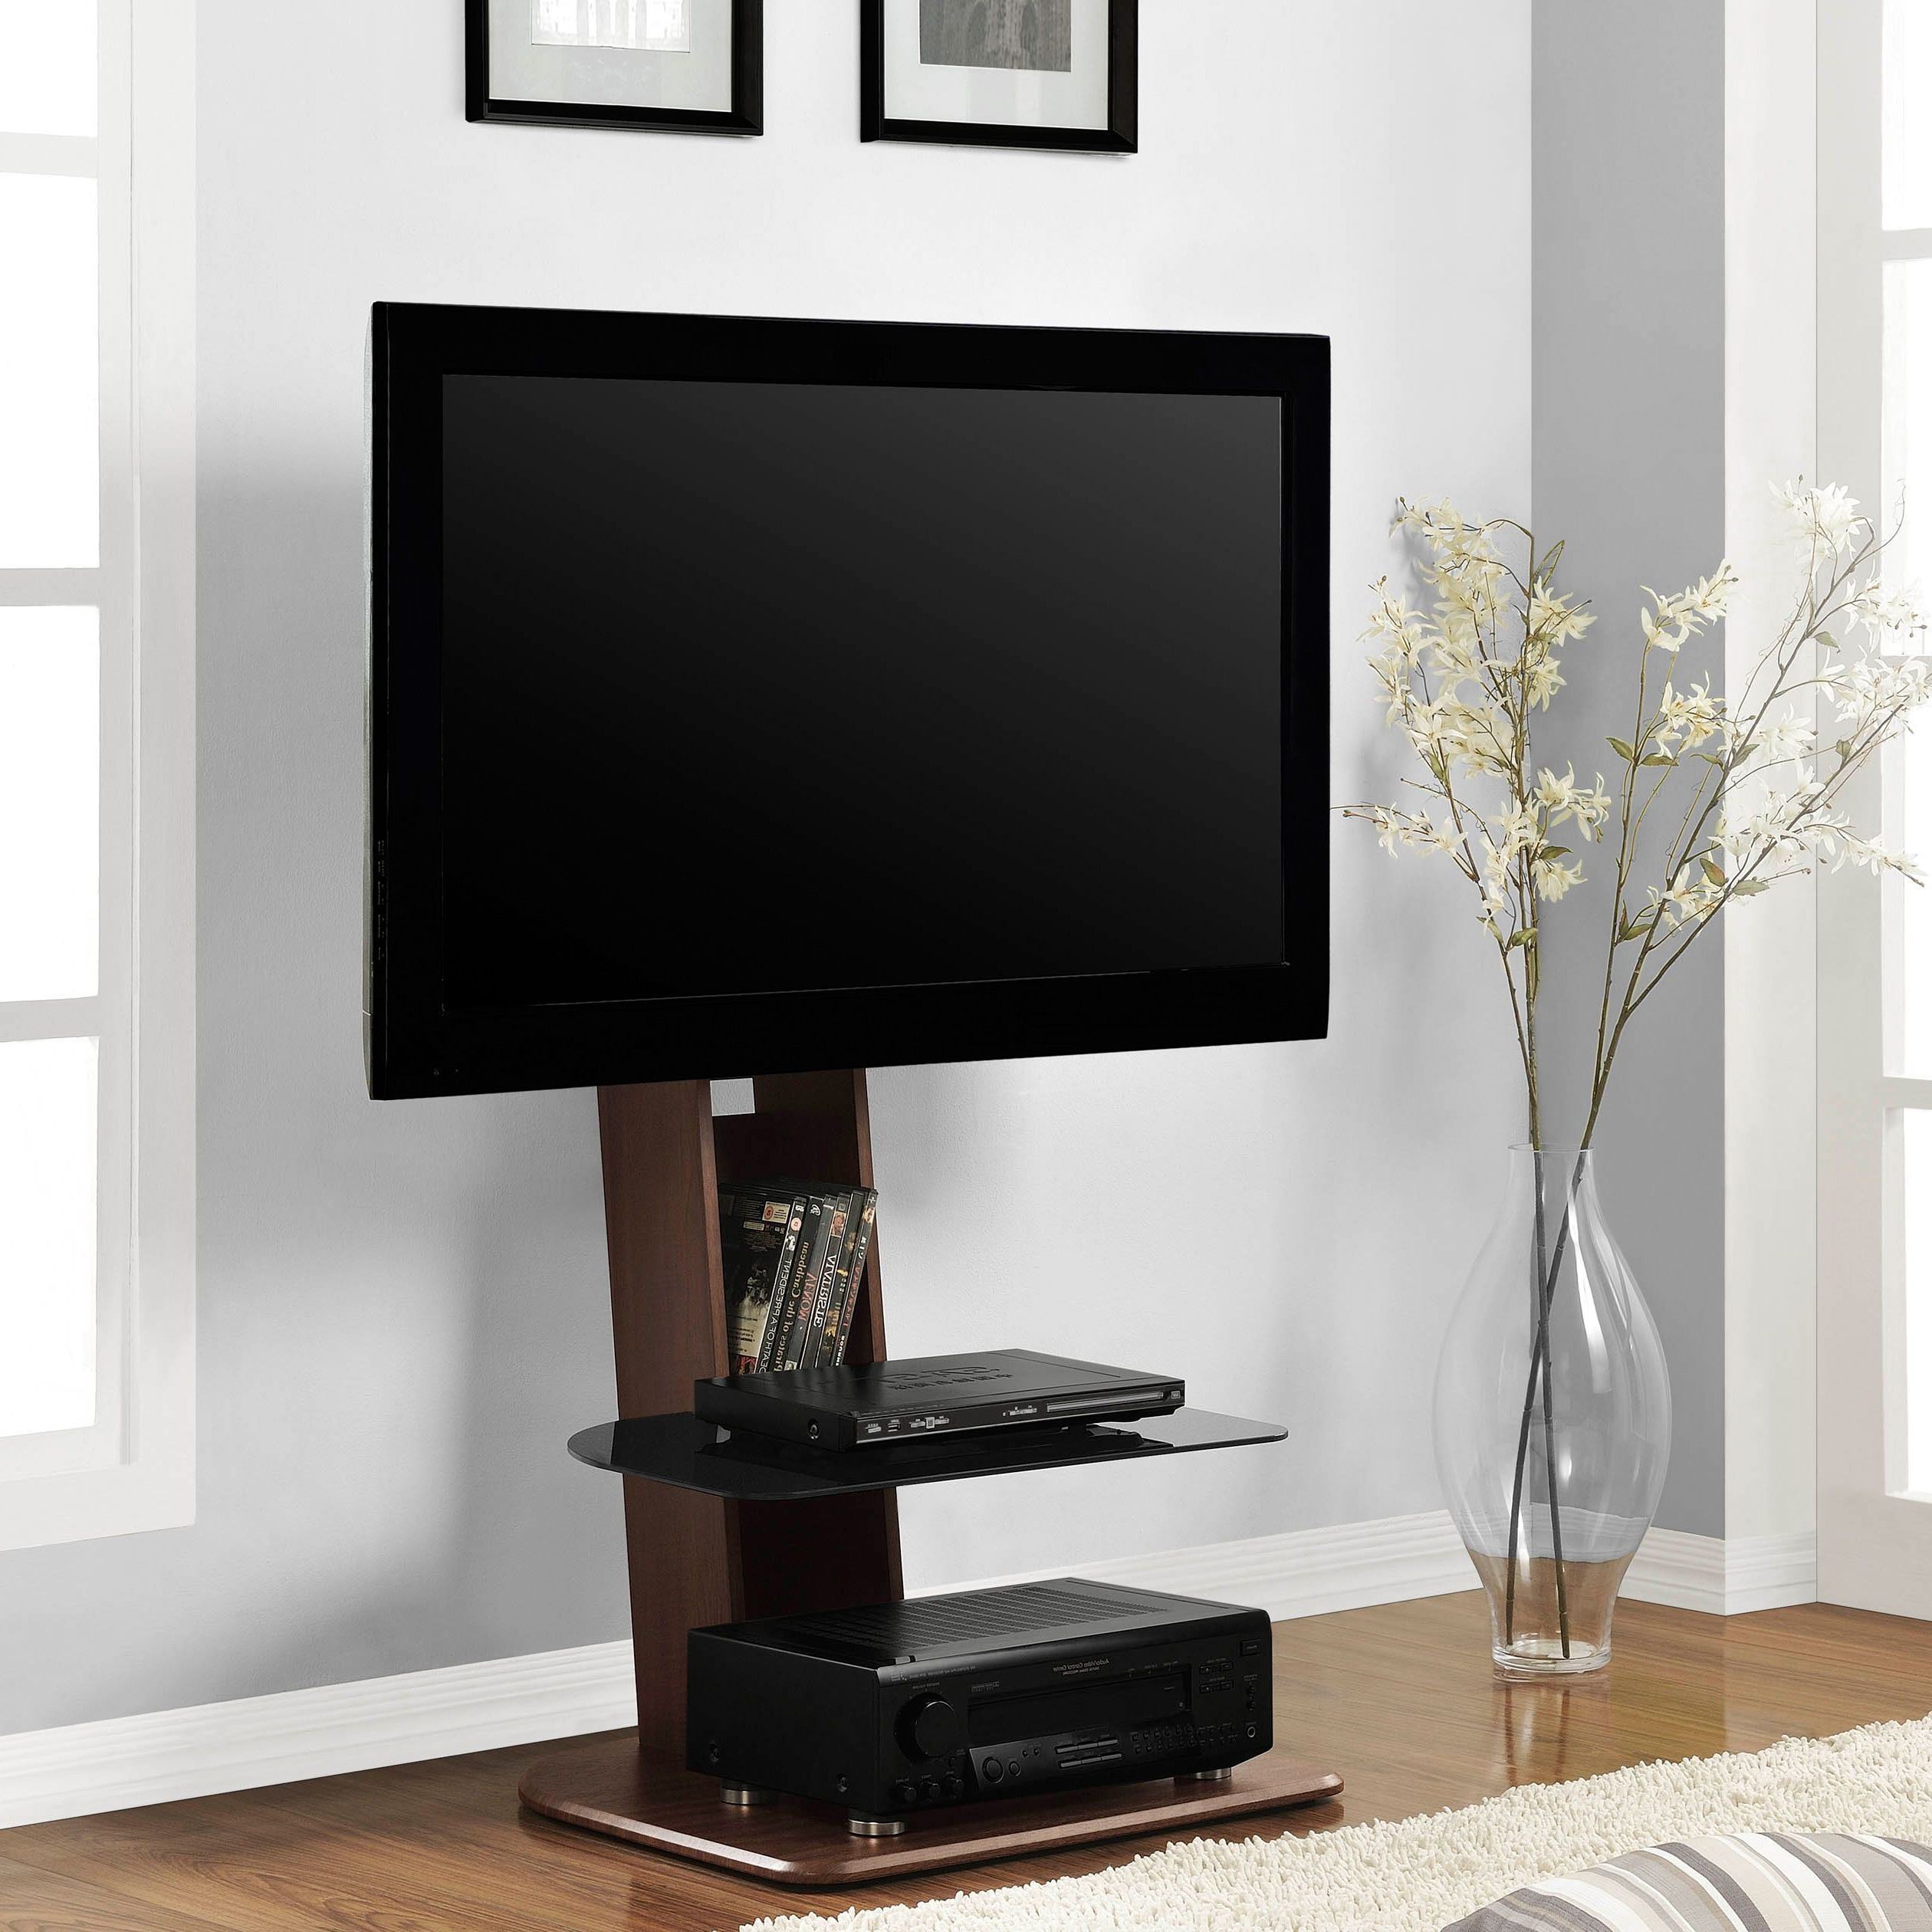 Get The Skinny On This Space Saving Tv Stand Featuring A Streamlined For Fashionable Skinny Tv Stands (View 4 of 20)